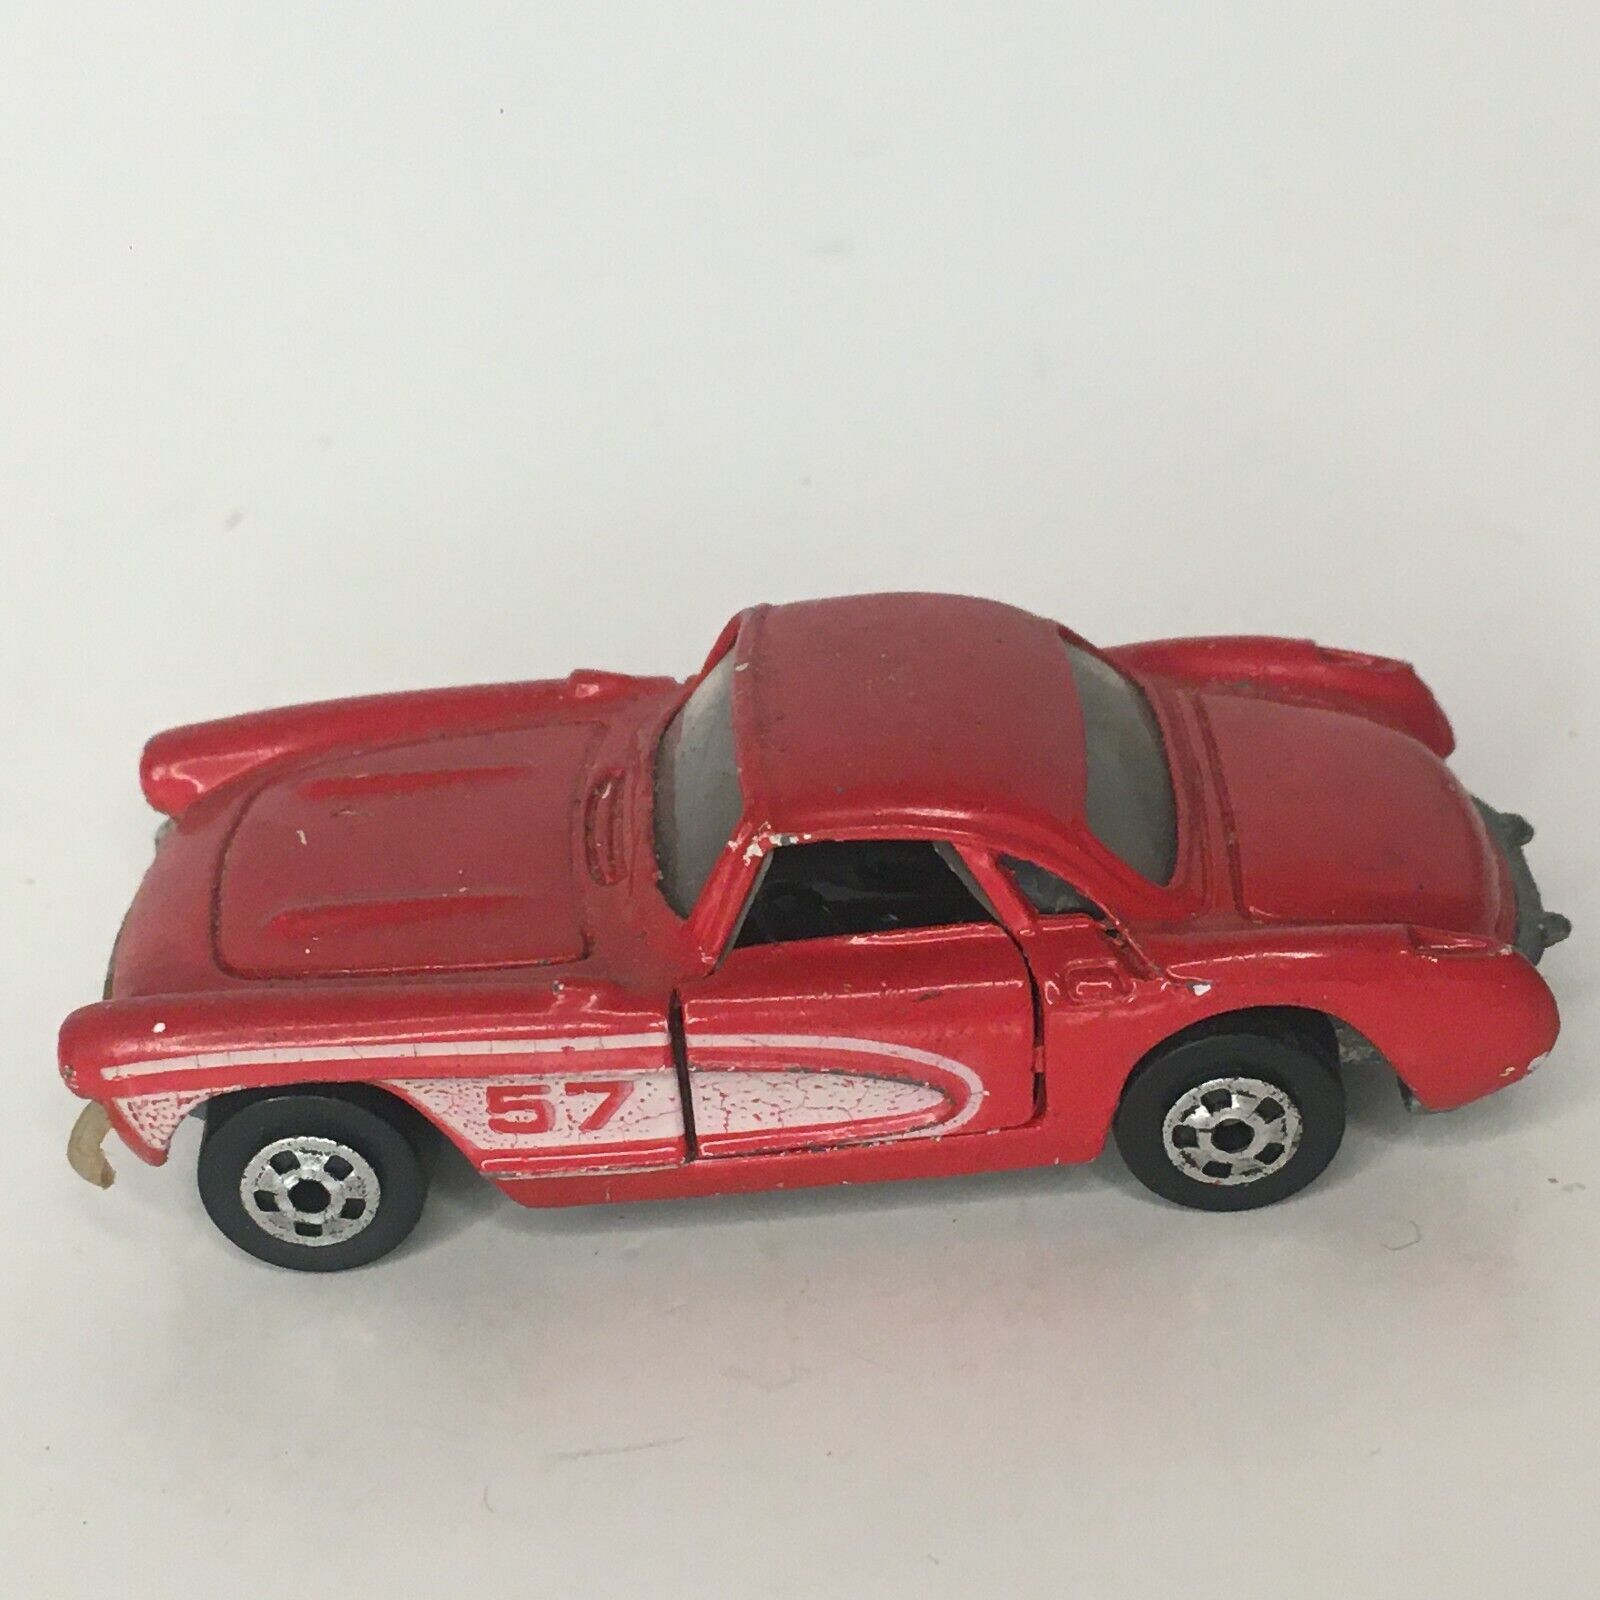 Road Champs 1957 Corvette Red 1982 Doors Open Sports Car Toy Diecast Loose - $4.99